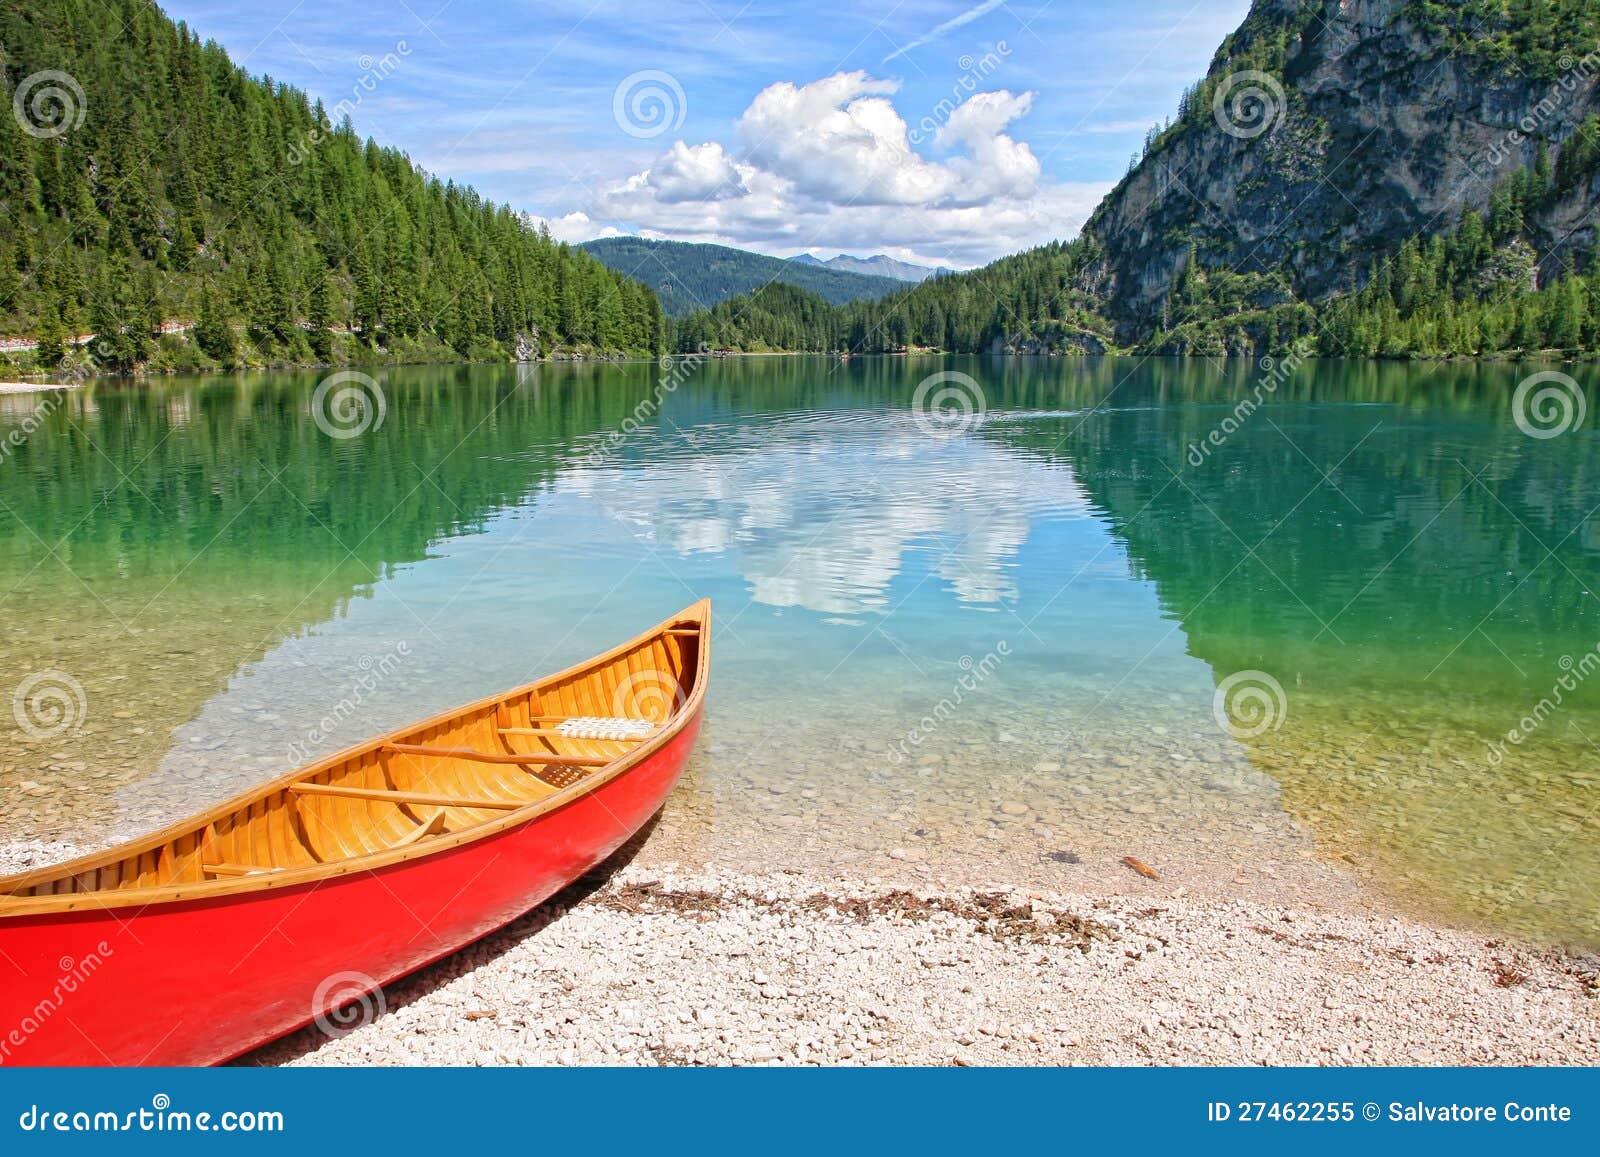 Lake of Braies with canoe in Dolomiti Mountains - Italy Europe.